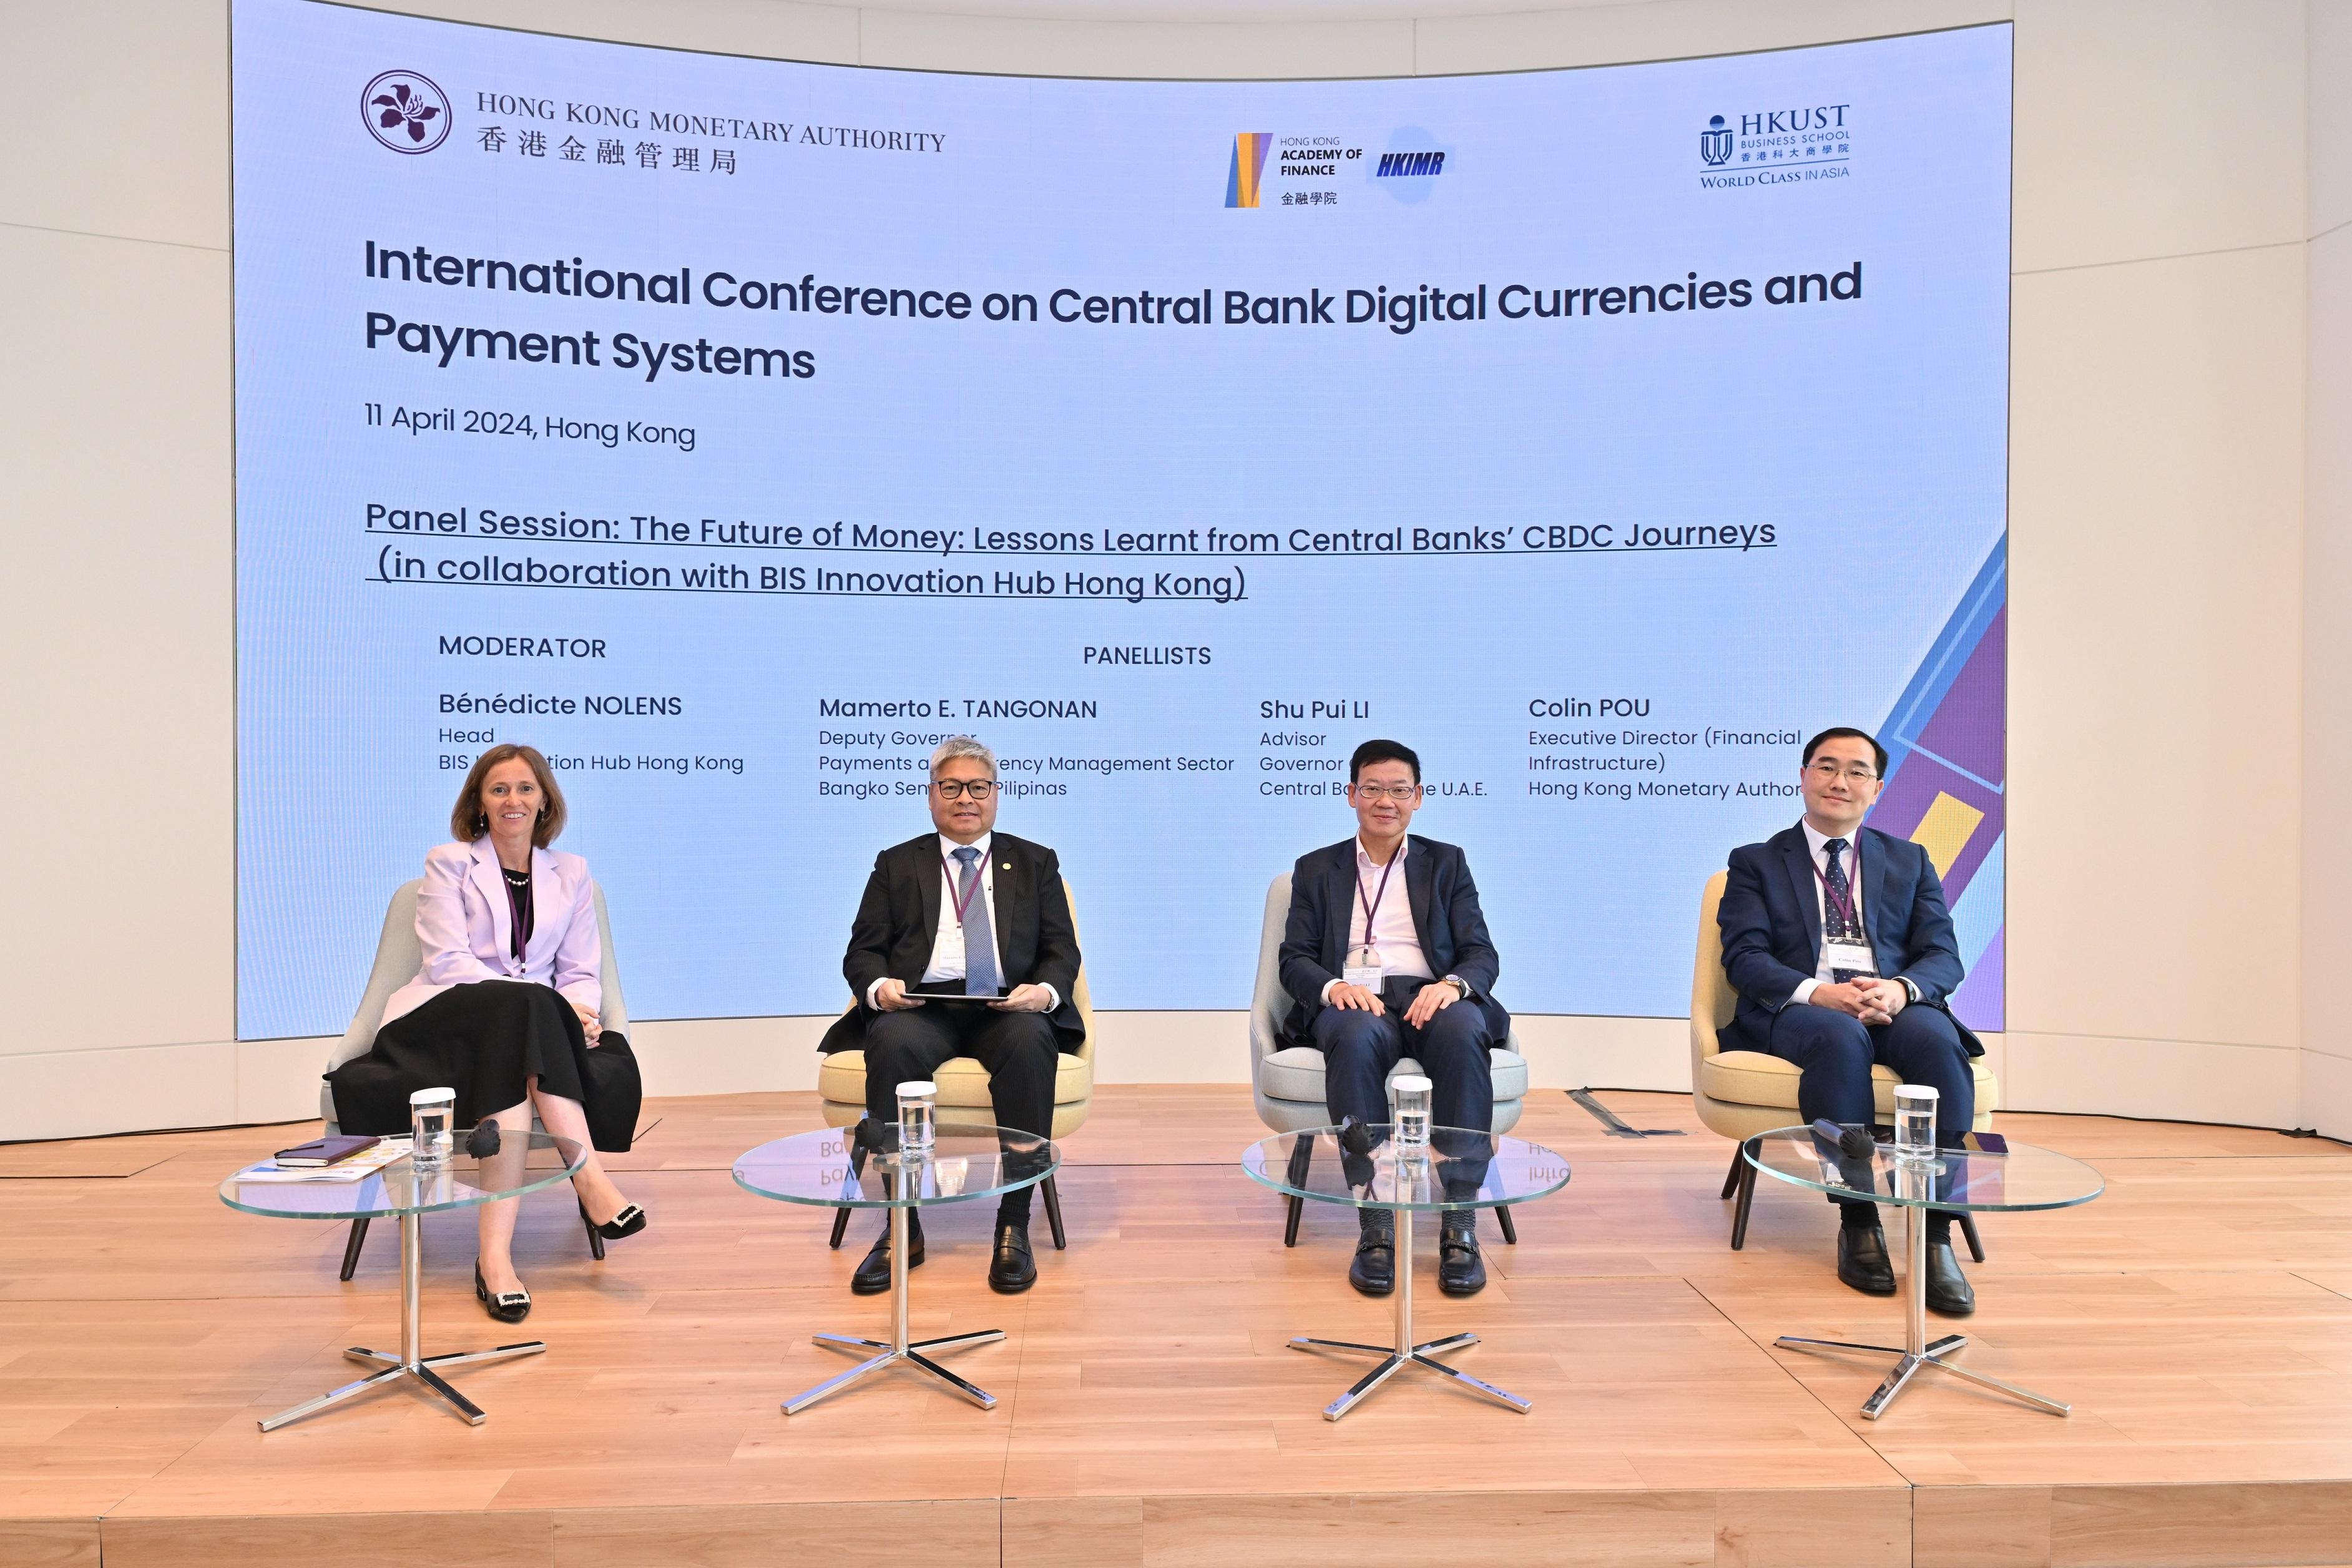 Head of BIS Innovation Hub Hong Kong, Ms Bénédicte Nolens, moderates a panel discussion titled "The Future of Money: Lessons Learnt from Central Banks' CBDC Journey" with Advisor, Governor Office of Central Bank of the U.A.E., Mr Li Shu-pui; the Executive Director (Financial Infrastructure) of the Hong Kong Monetary Authority, Mr Colin Pou; and Deputy Governor, Payments and Currency Management Sector of Bangko Sentral ng Pilipinas, Mr Mamerto E. Tangonan. 